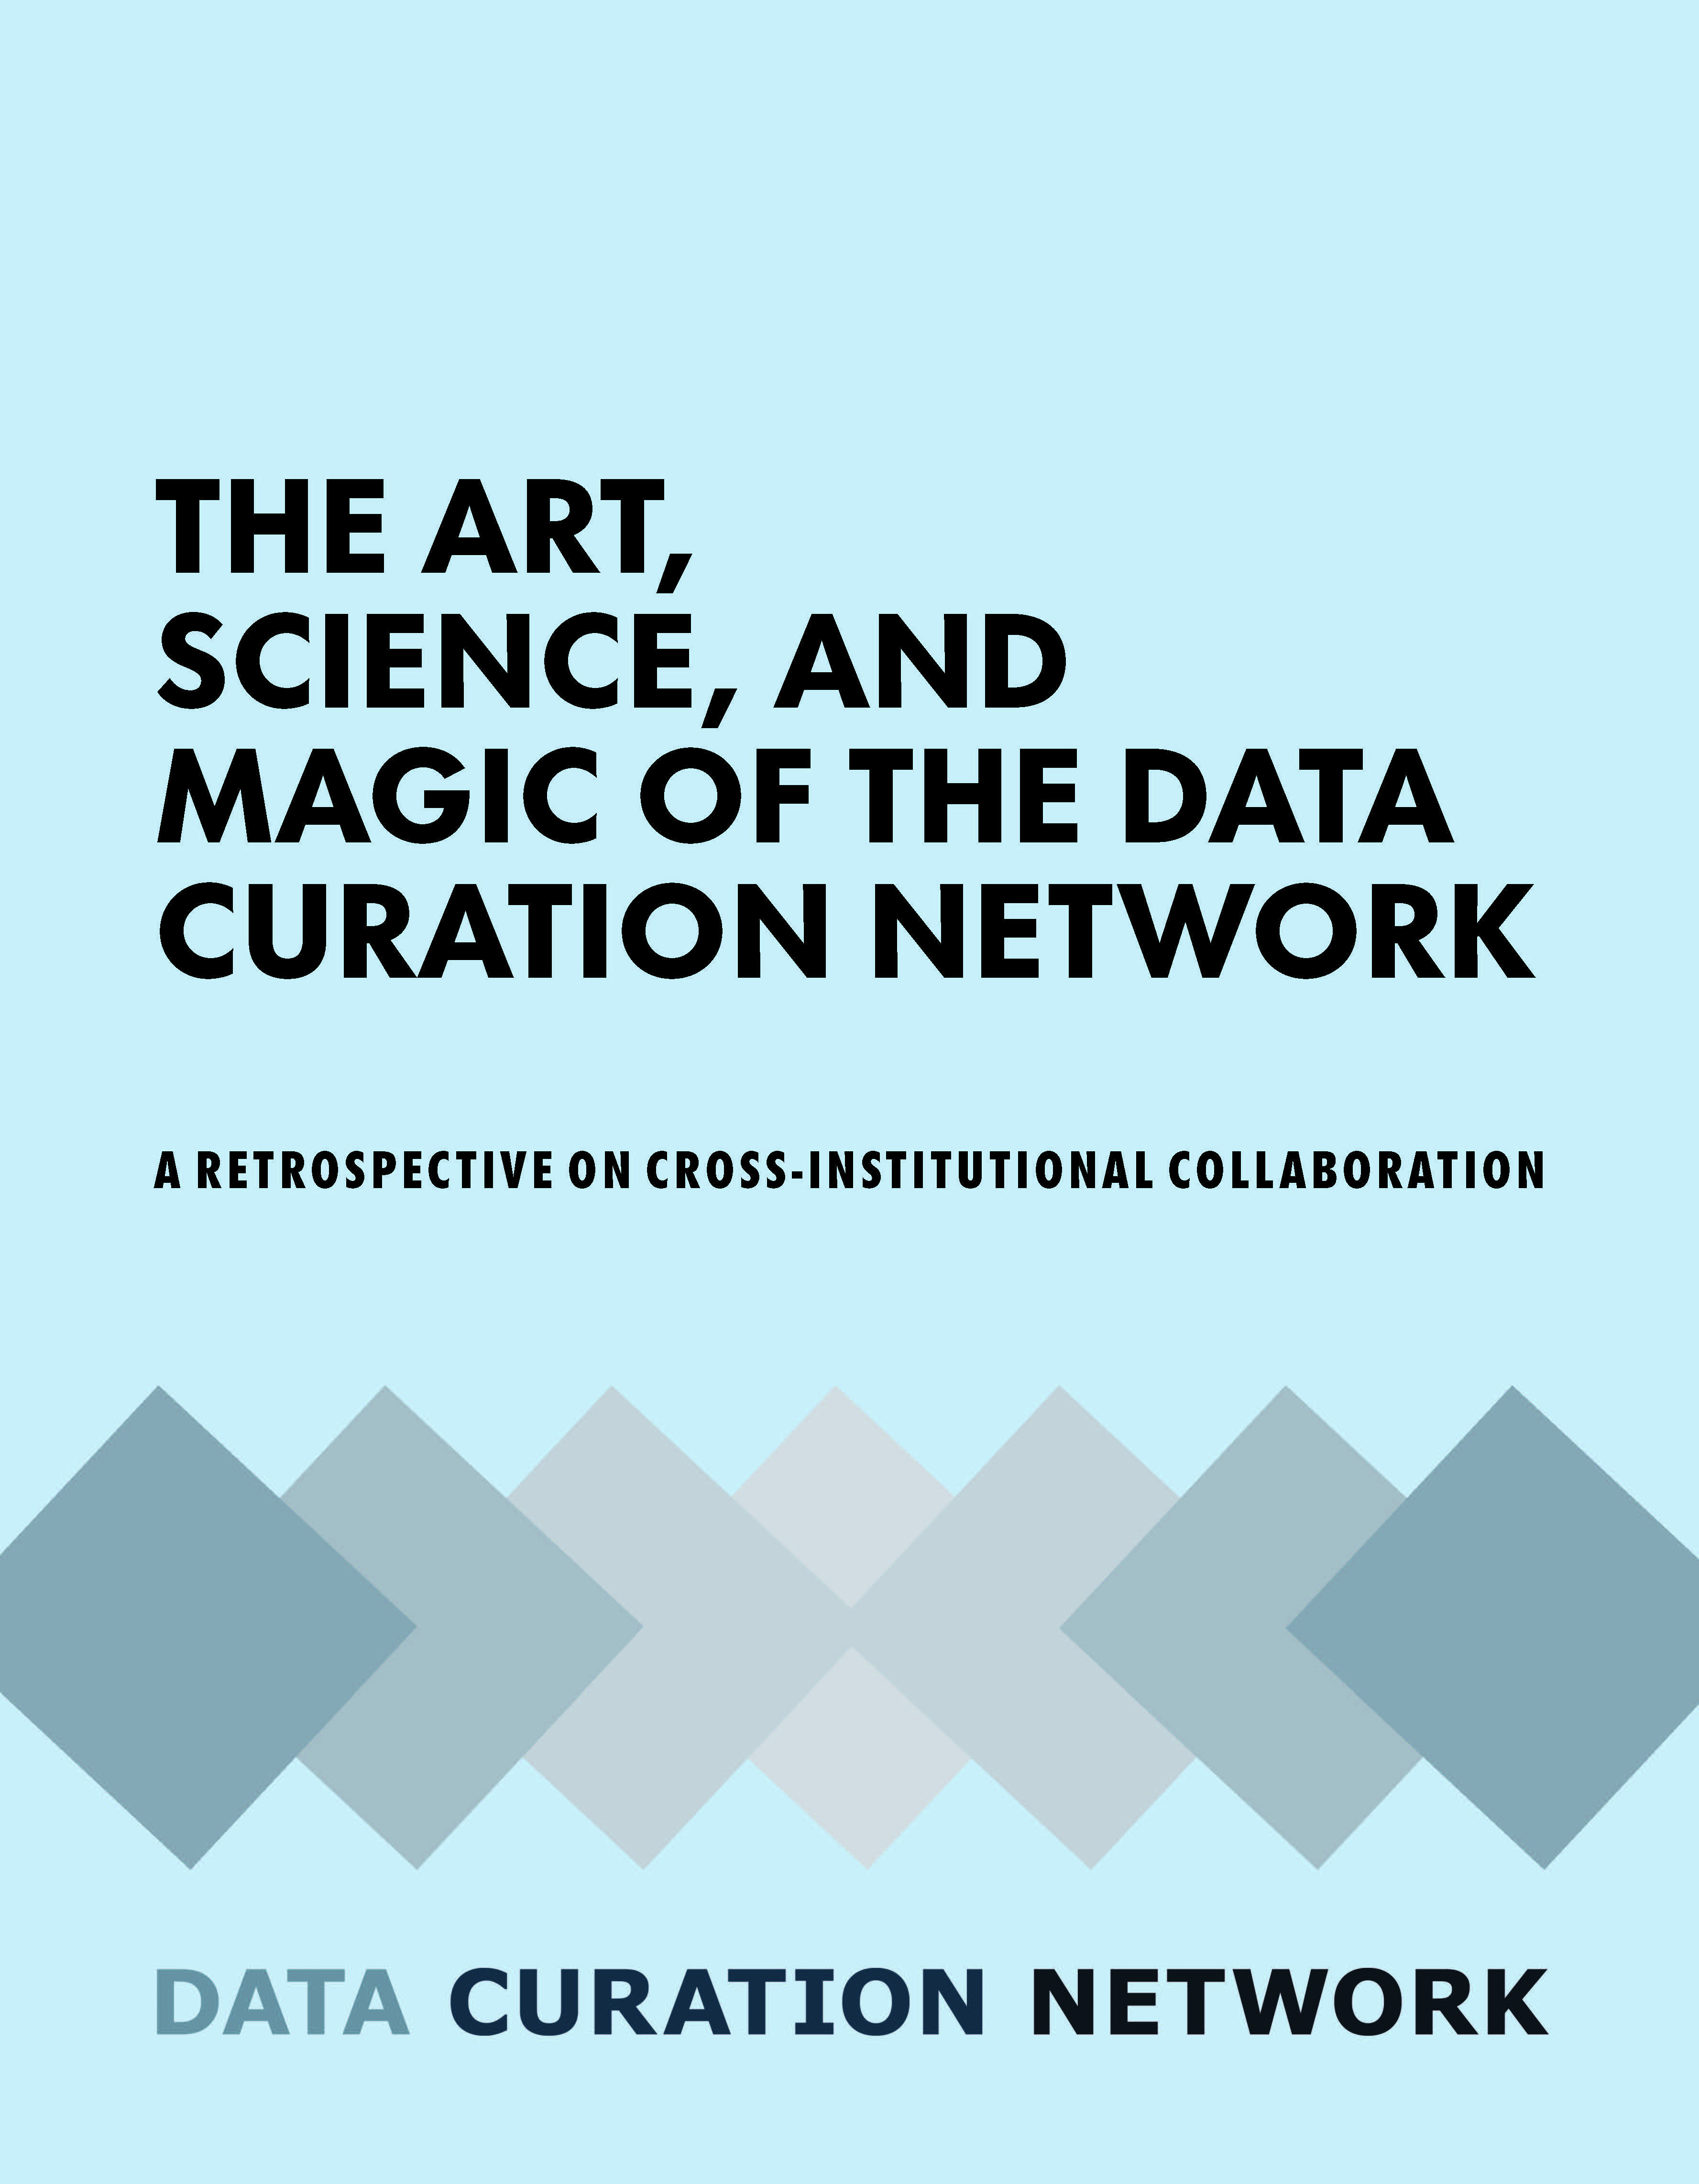 The Art, Science, and Magic of the Data Curation Network